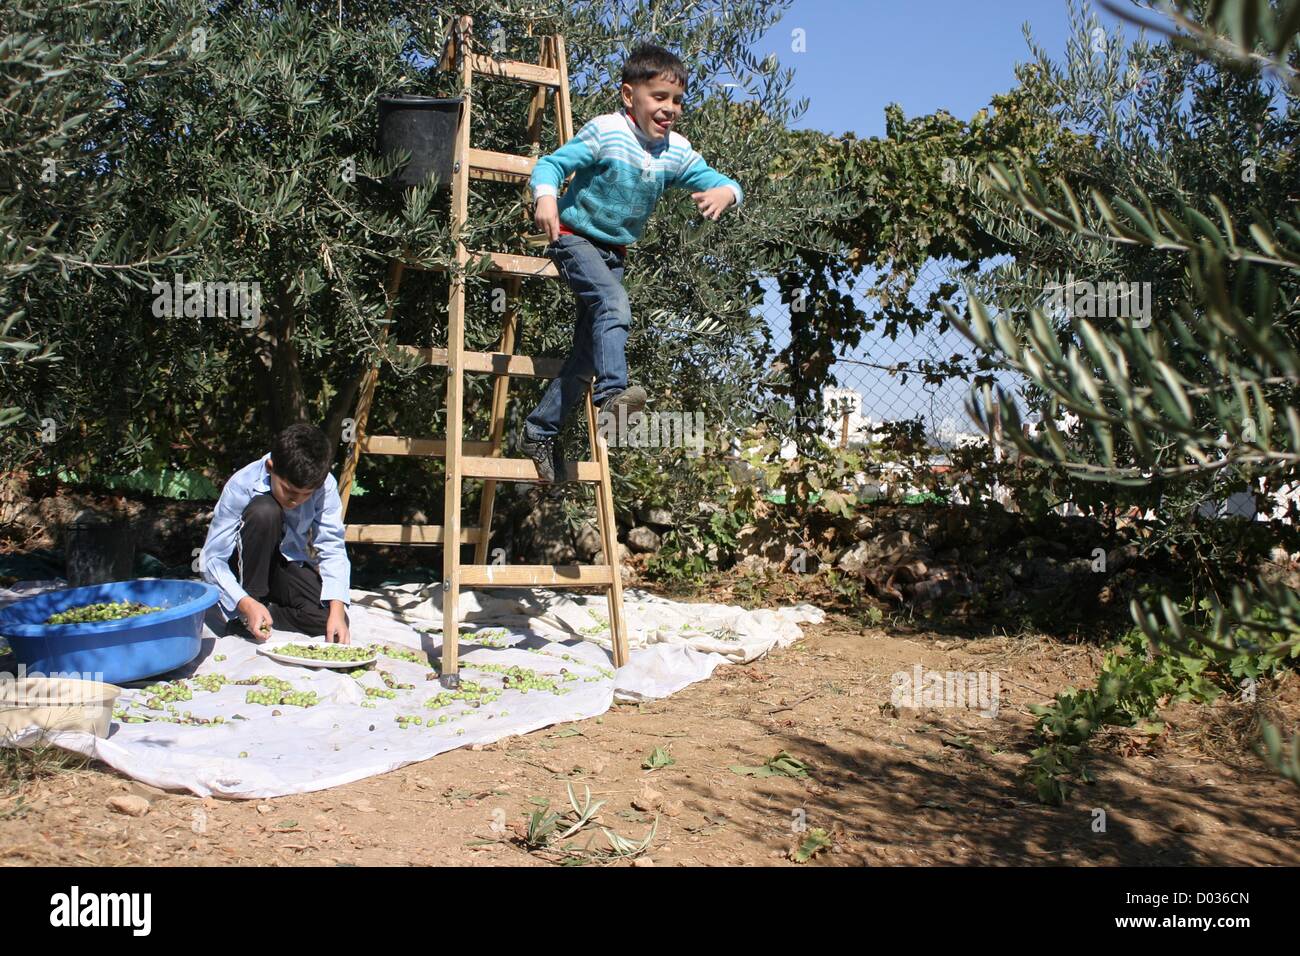 Nov. 15, 2012 - Hebron, West Bank, Palestinian Territory - Palestinian students from Jawad school take part in harvest olives in the West Bank city of Hebron on November 15, 2012. As Palestinians have marked Nov. 15 as their Independence Day since 1988, when the Palestine National Council unilaterally declared statehood in the West Bank and Gaza Strip  (Credit Image: © Najeh Hashlamoun/APA Images/ZUMAPRESS.com) Stock Photo